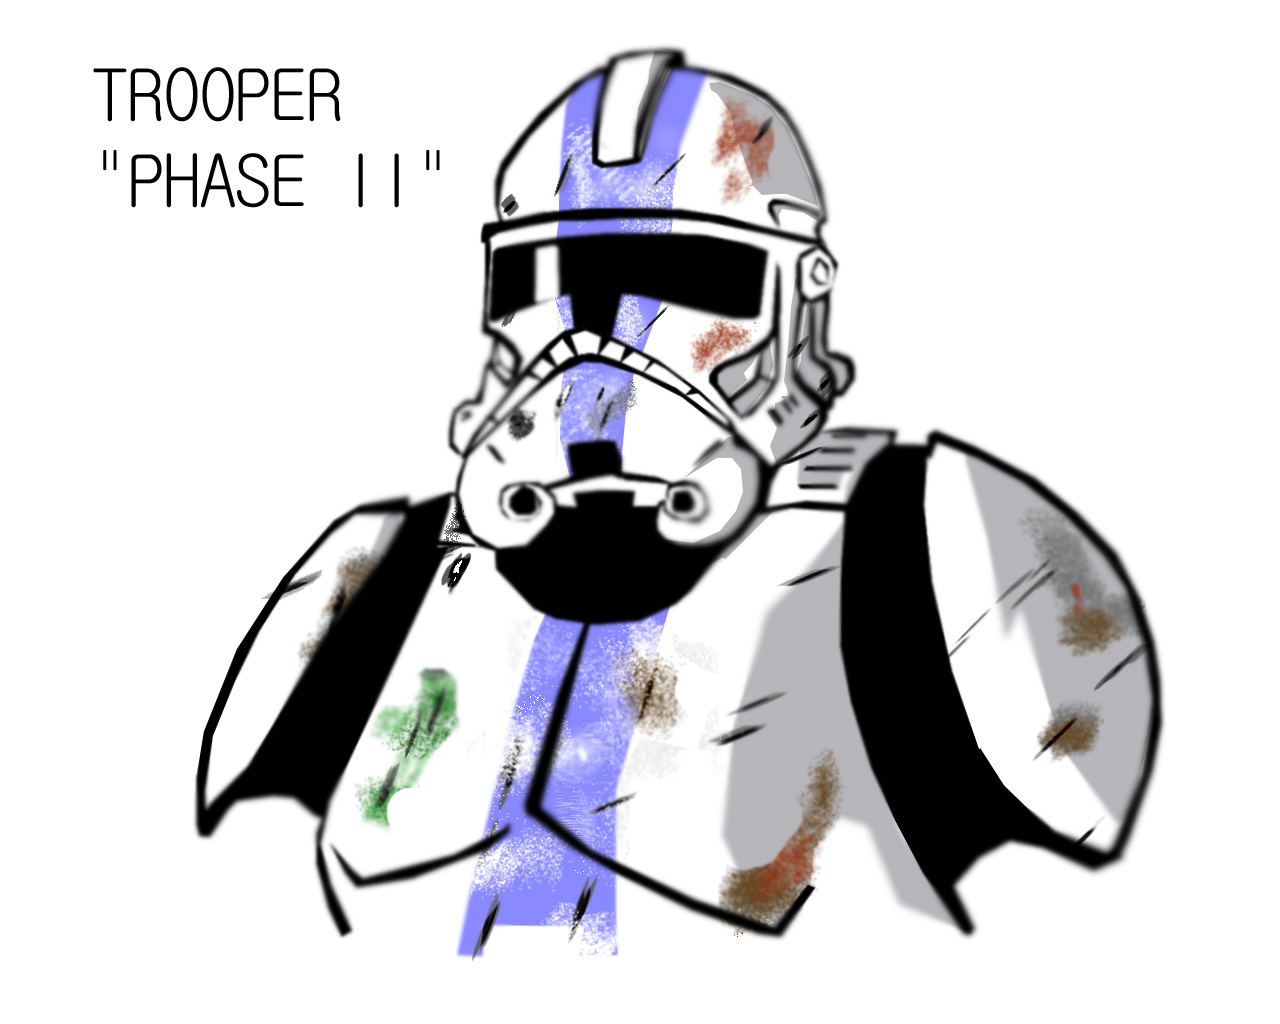 A "Phase II" Clone Trooper (Vader's Fist) by uncyclomaniac